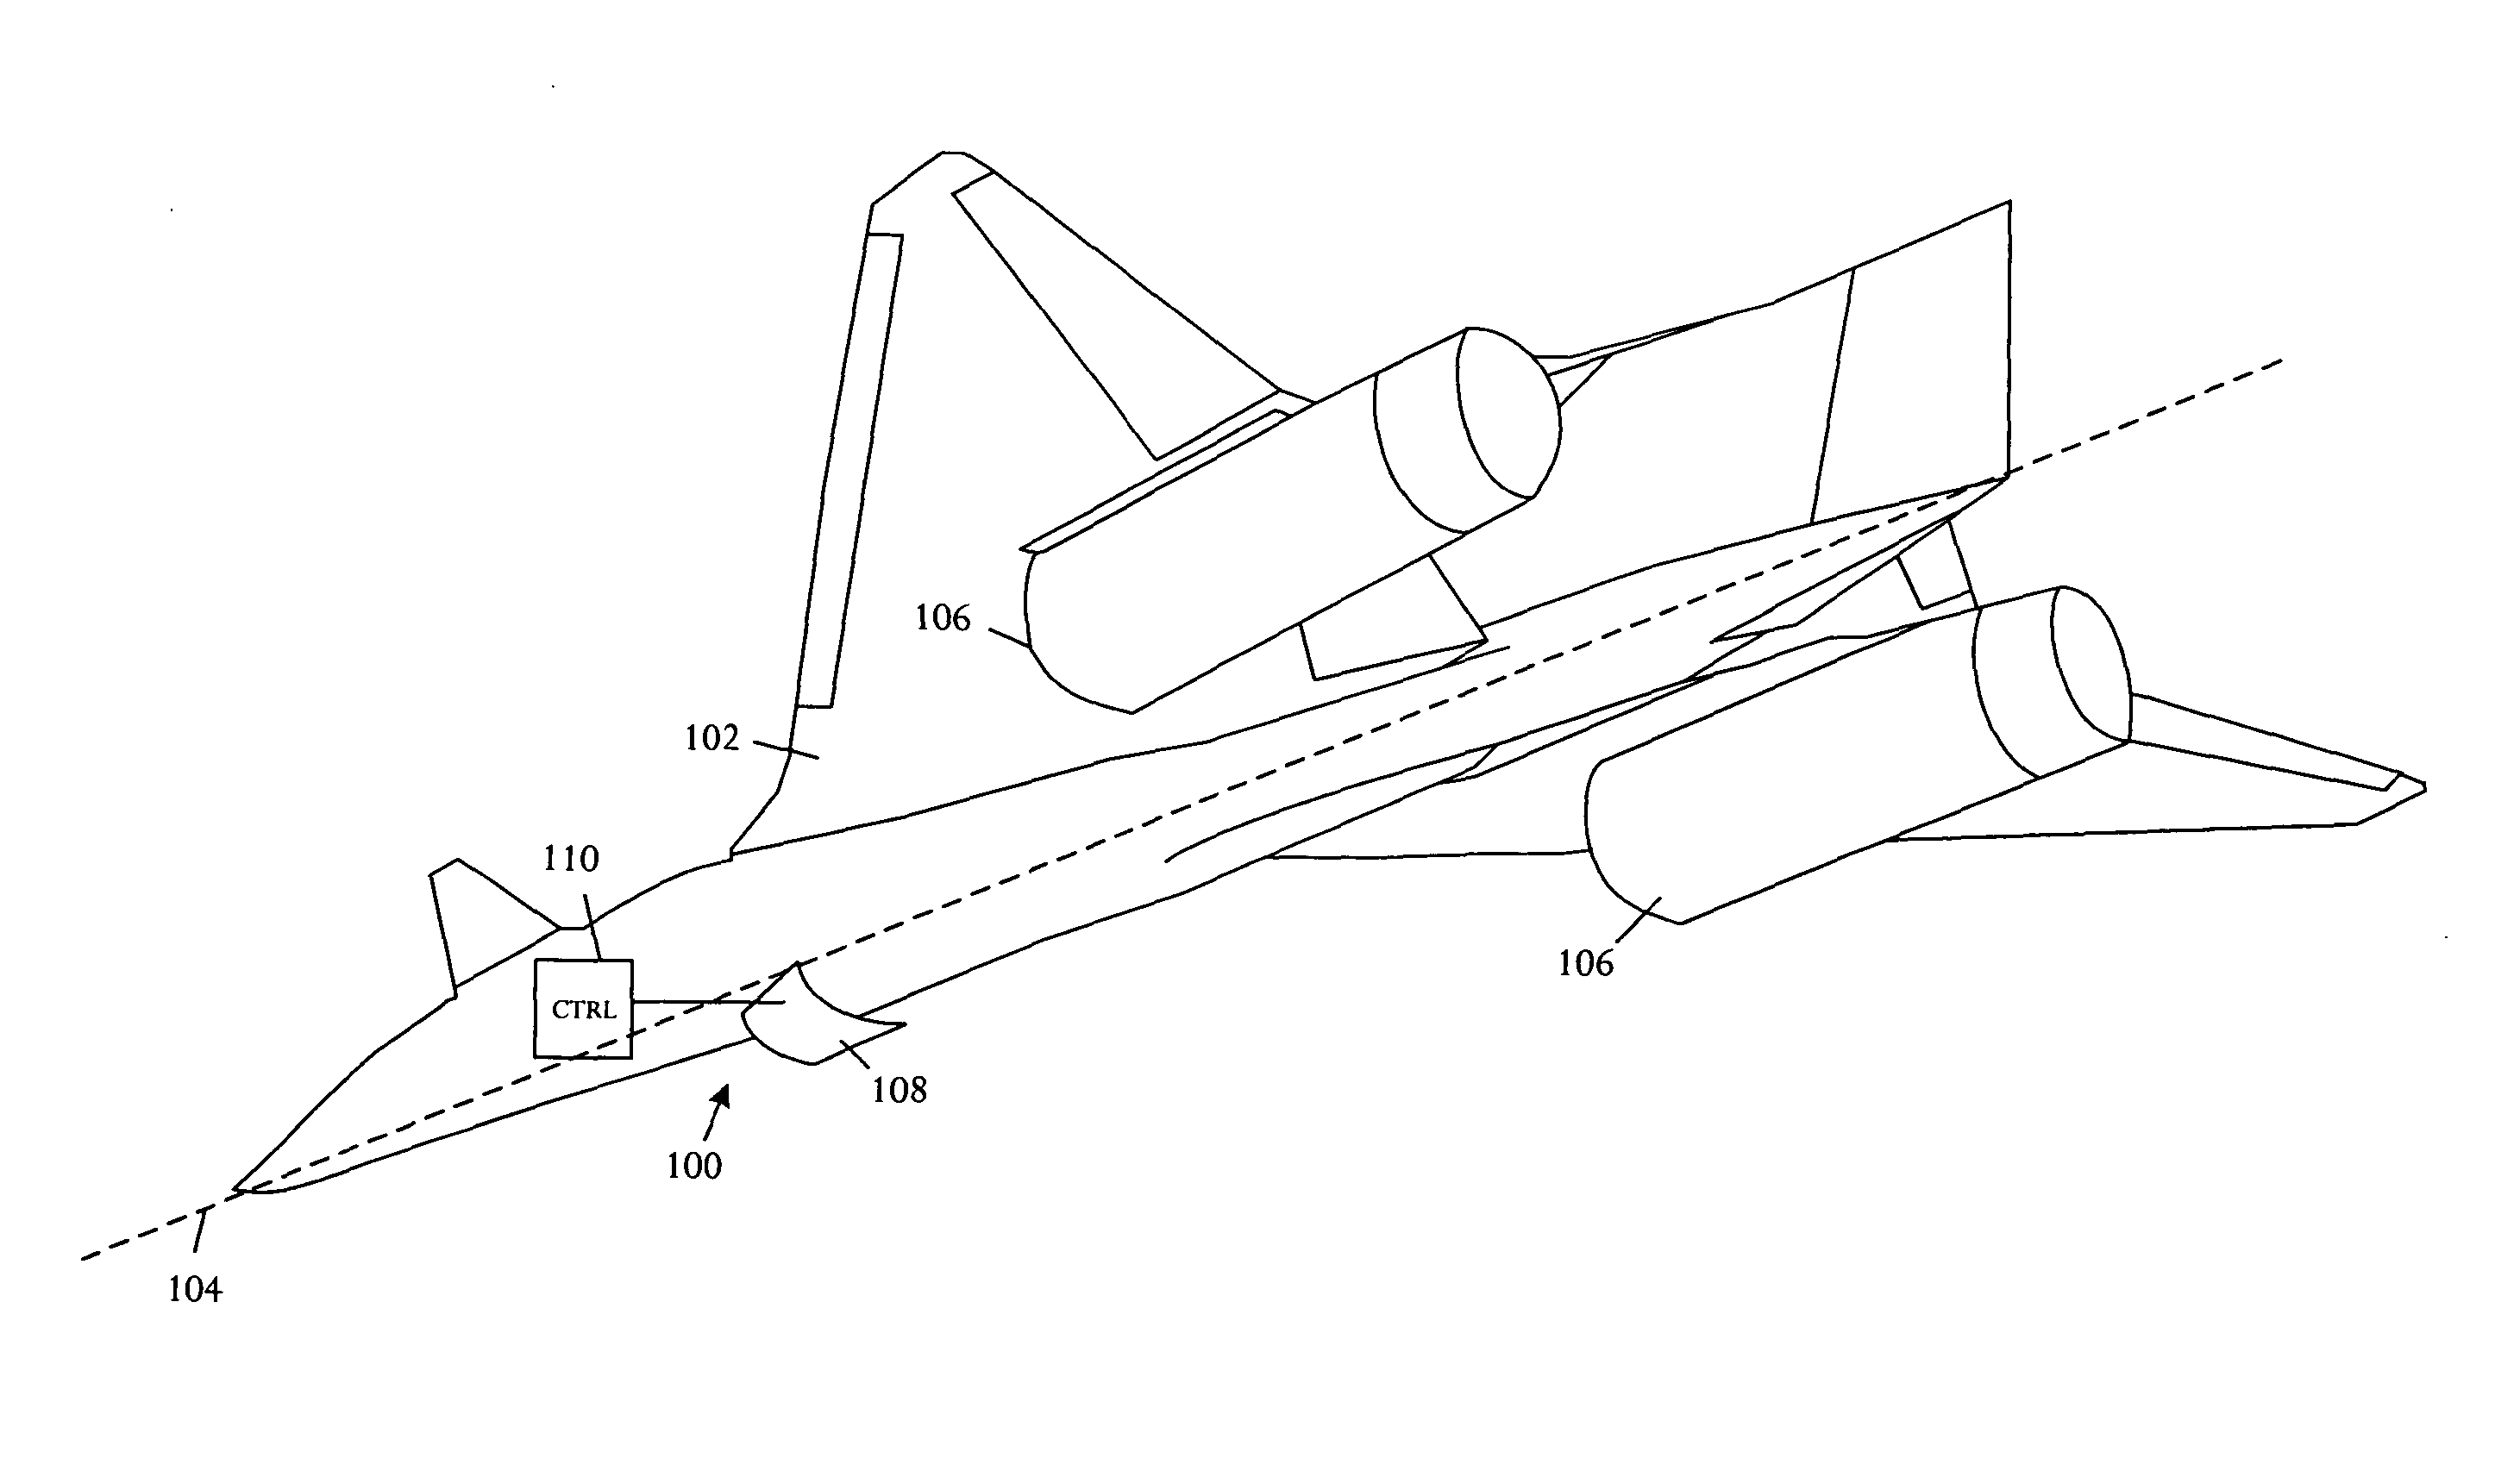 Aircraft thickness/camber control device for low sonic boom